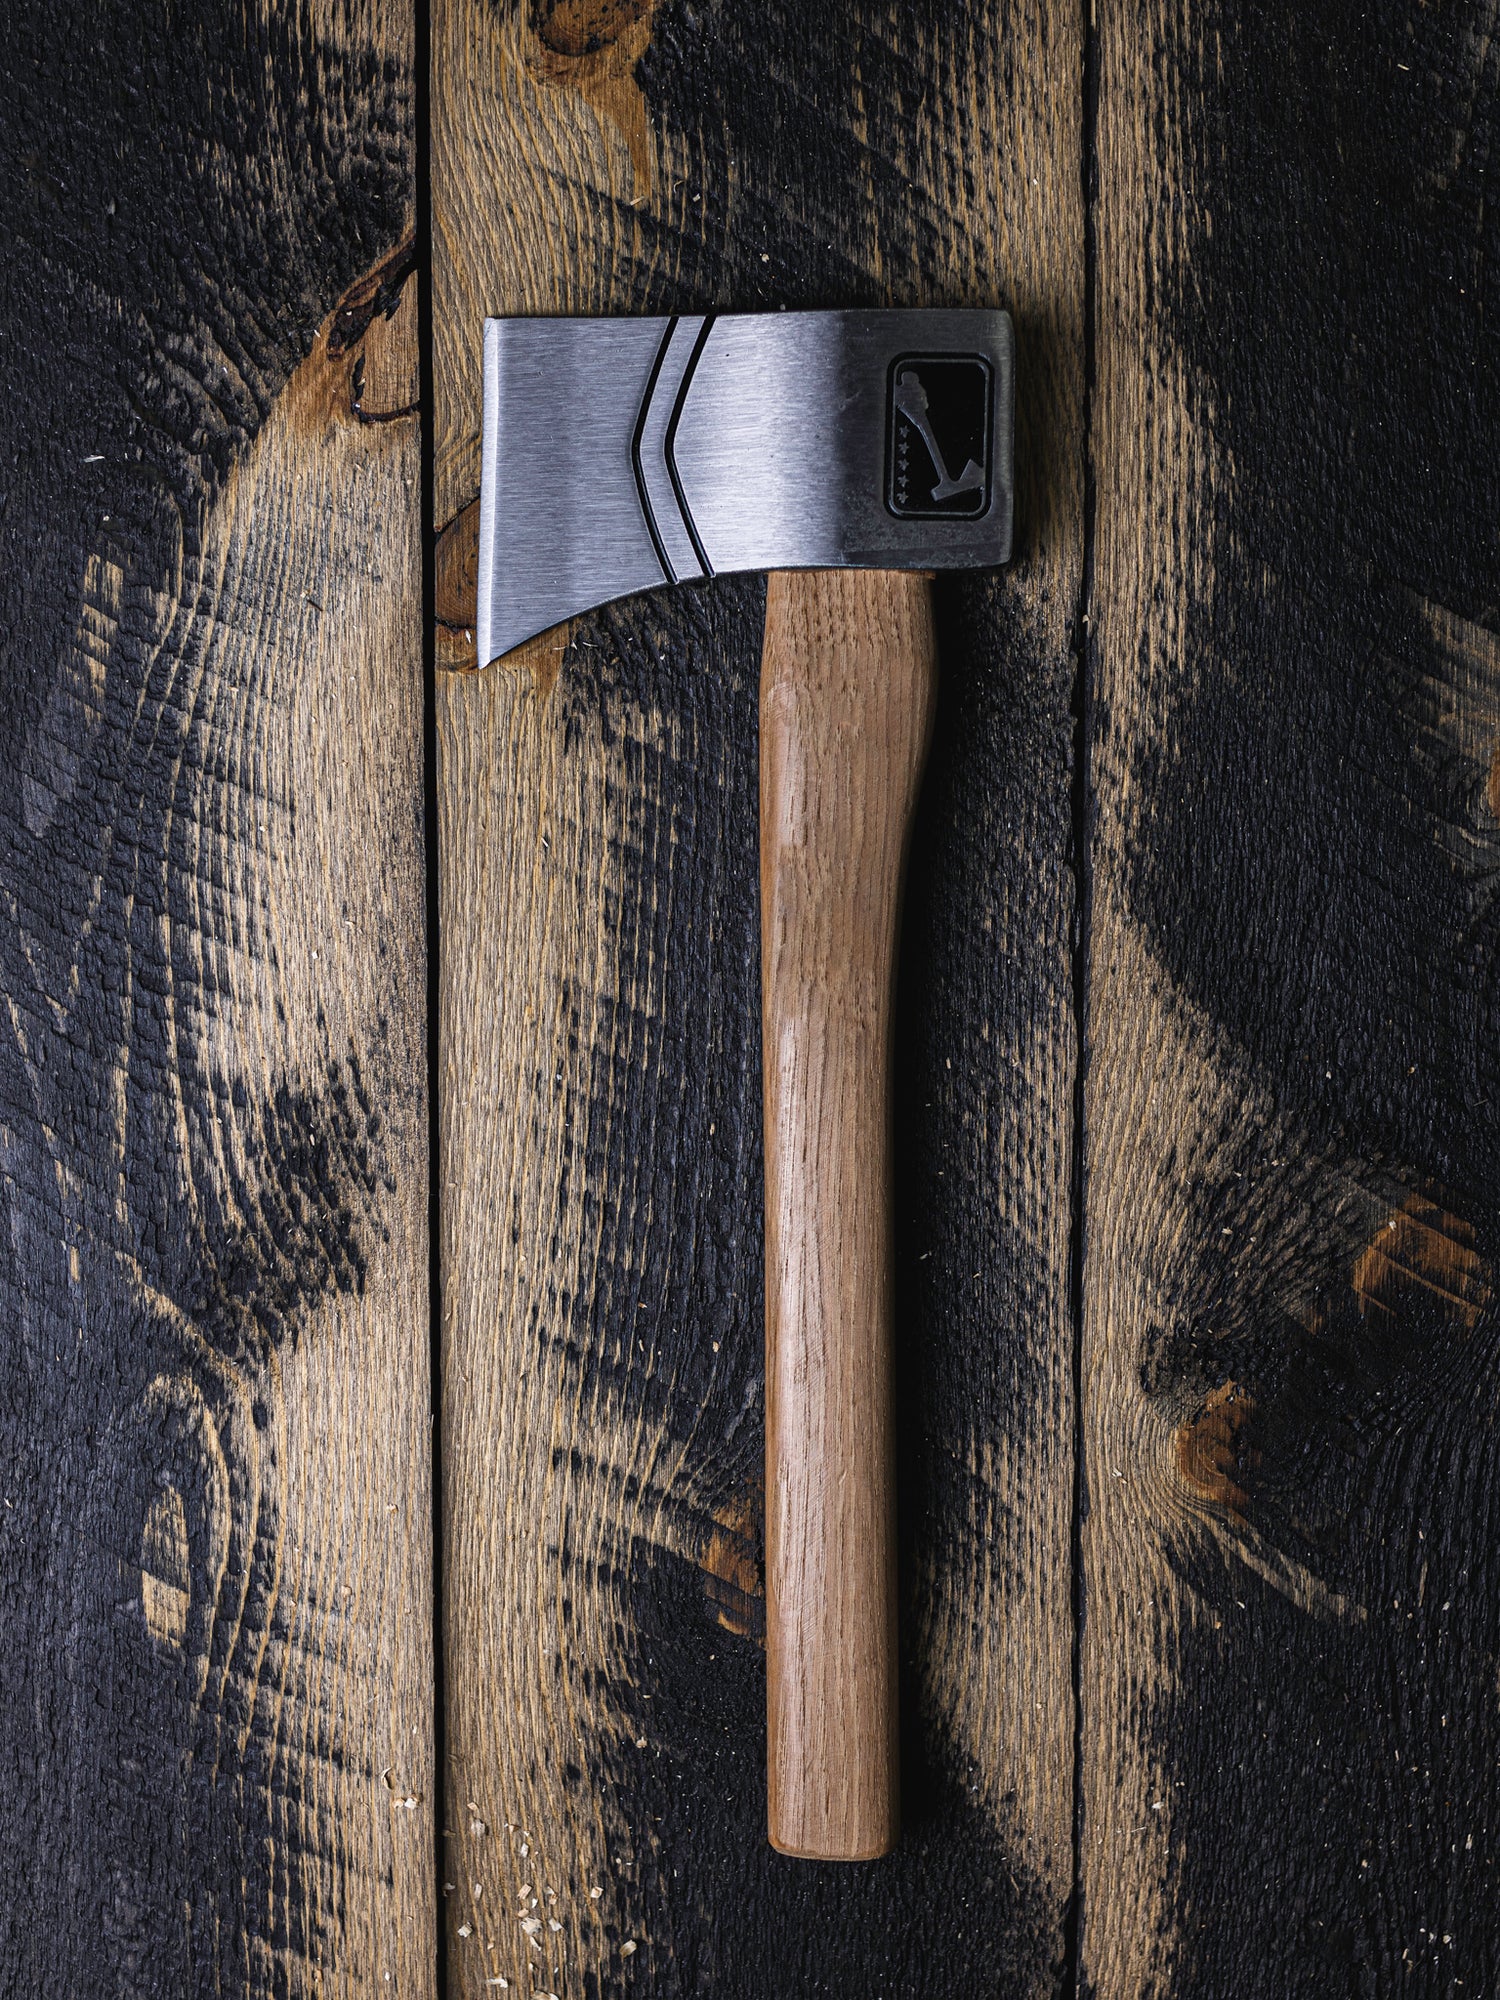 The Corporal Competition Throwing Axe by World Axe Throwing League (WATL)